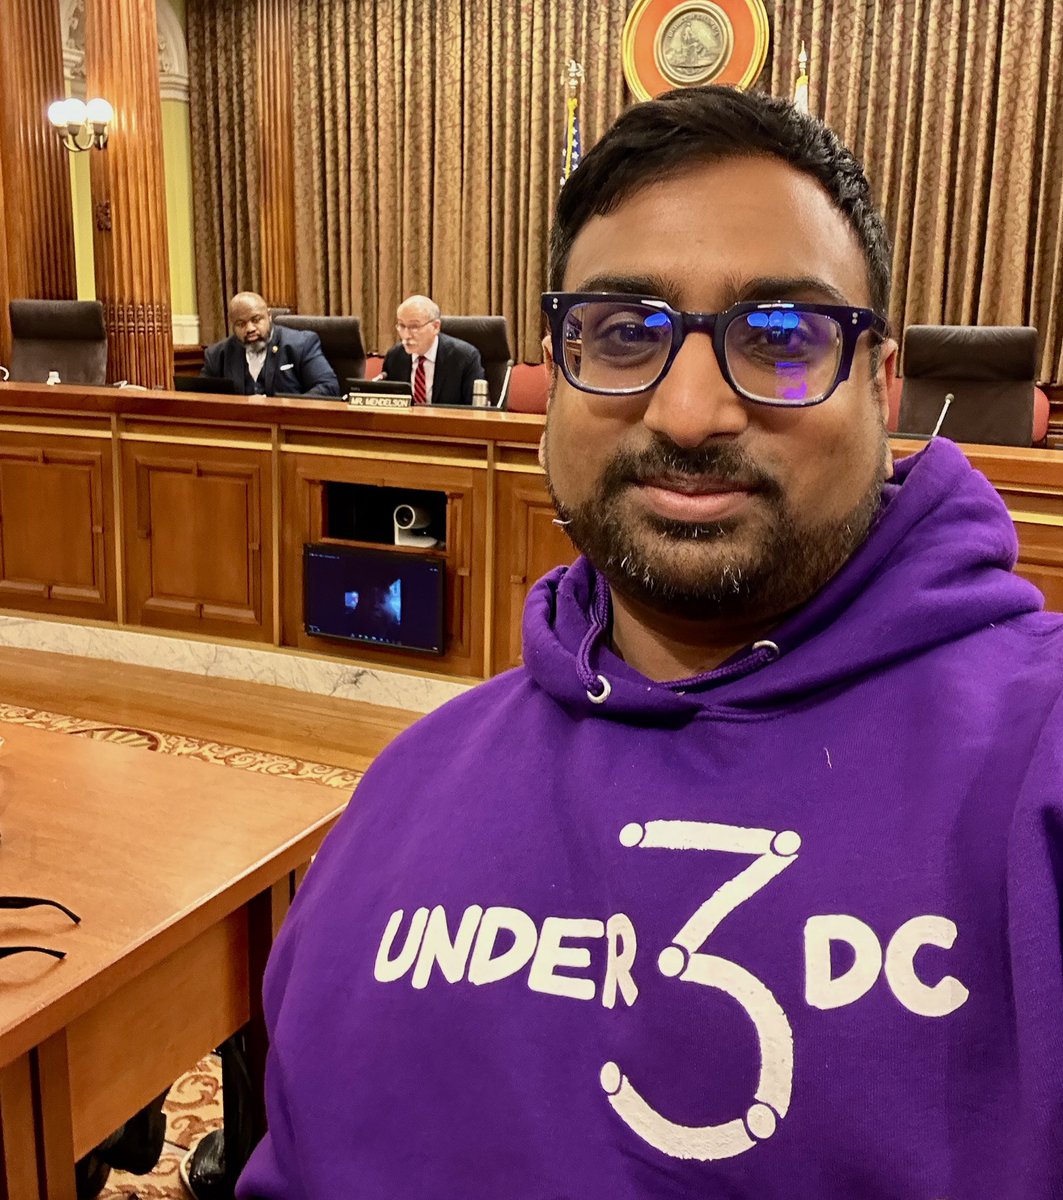 I have been at the Wilson Building for 13 hours to be in solidarity with early educators fighting to defend their pay from being stolen by @MayorBowser. Join their campaign for living wages that they have MORE than earned. bit.ly/DefendOurPay #Under3DC